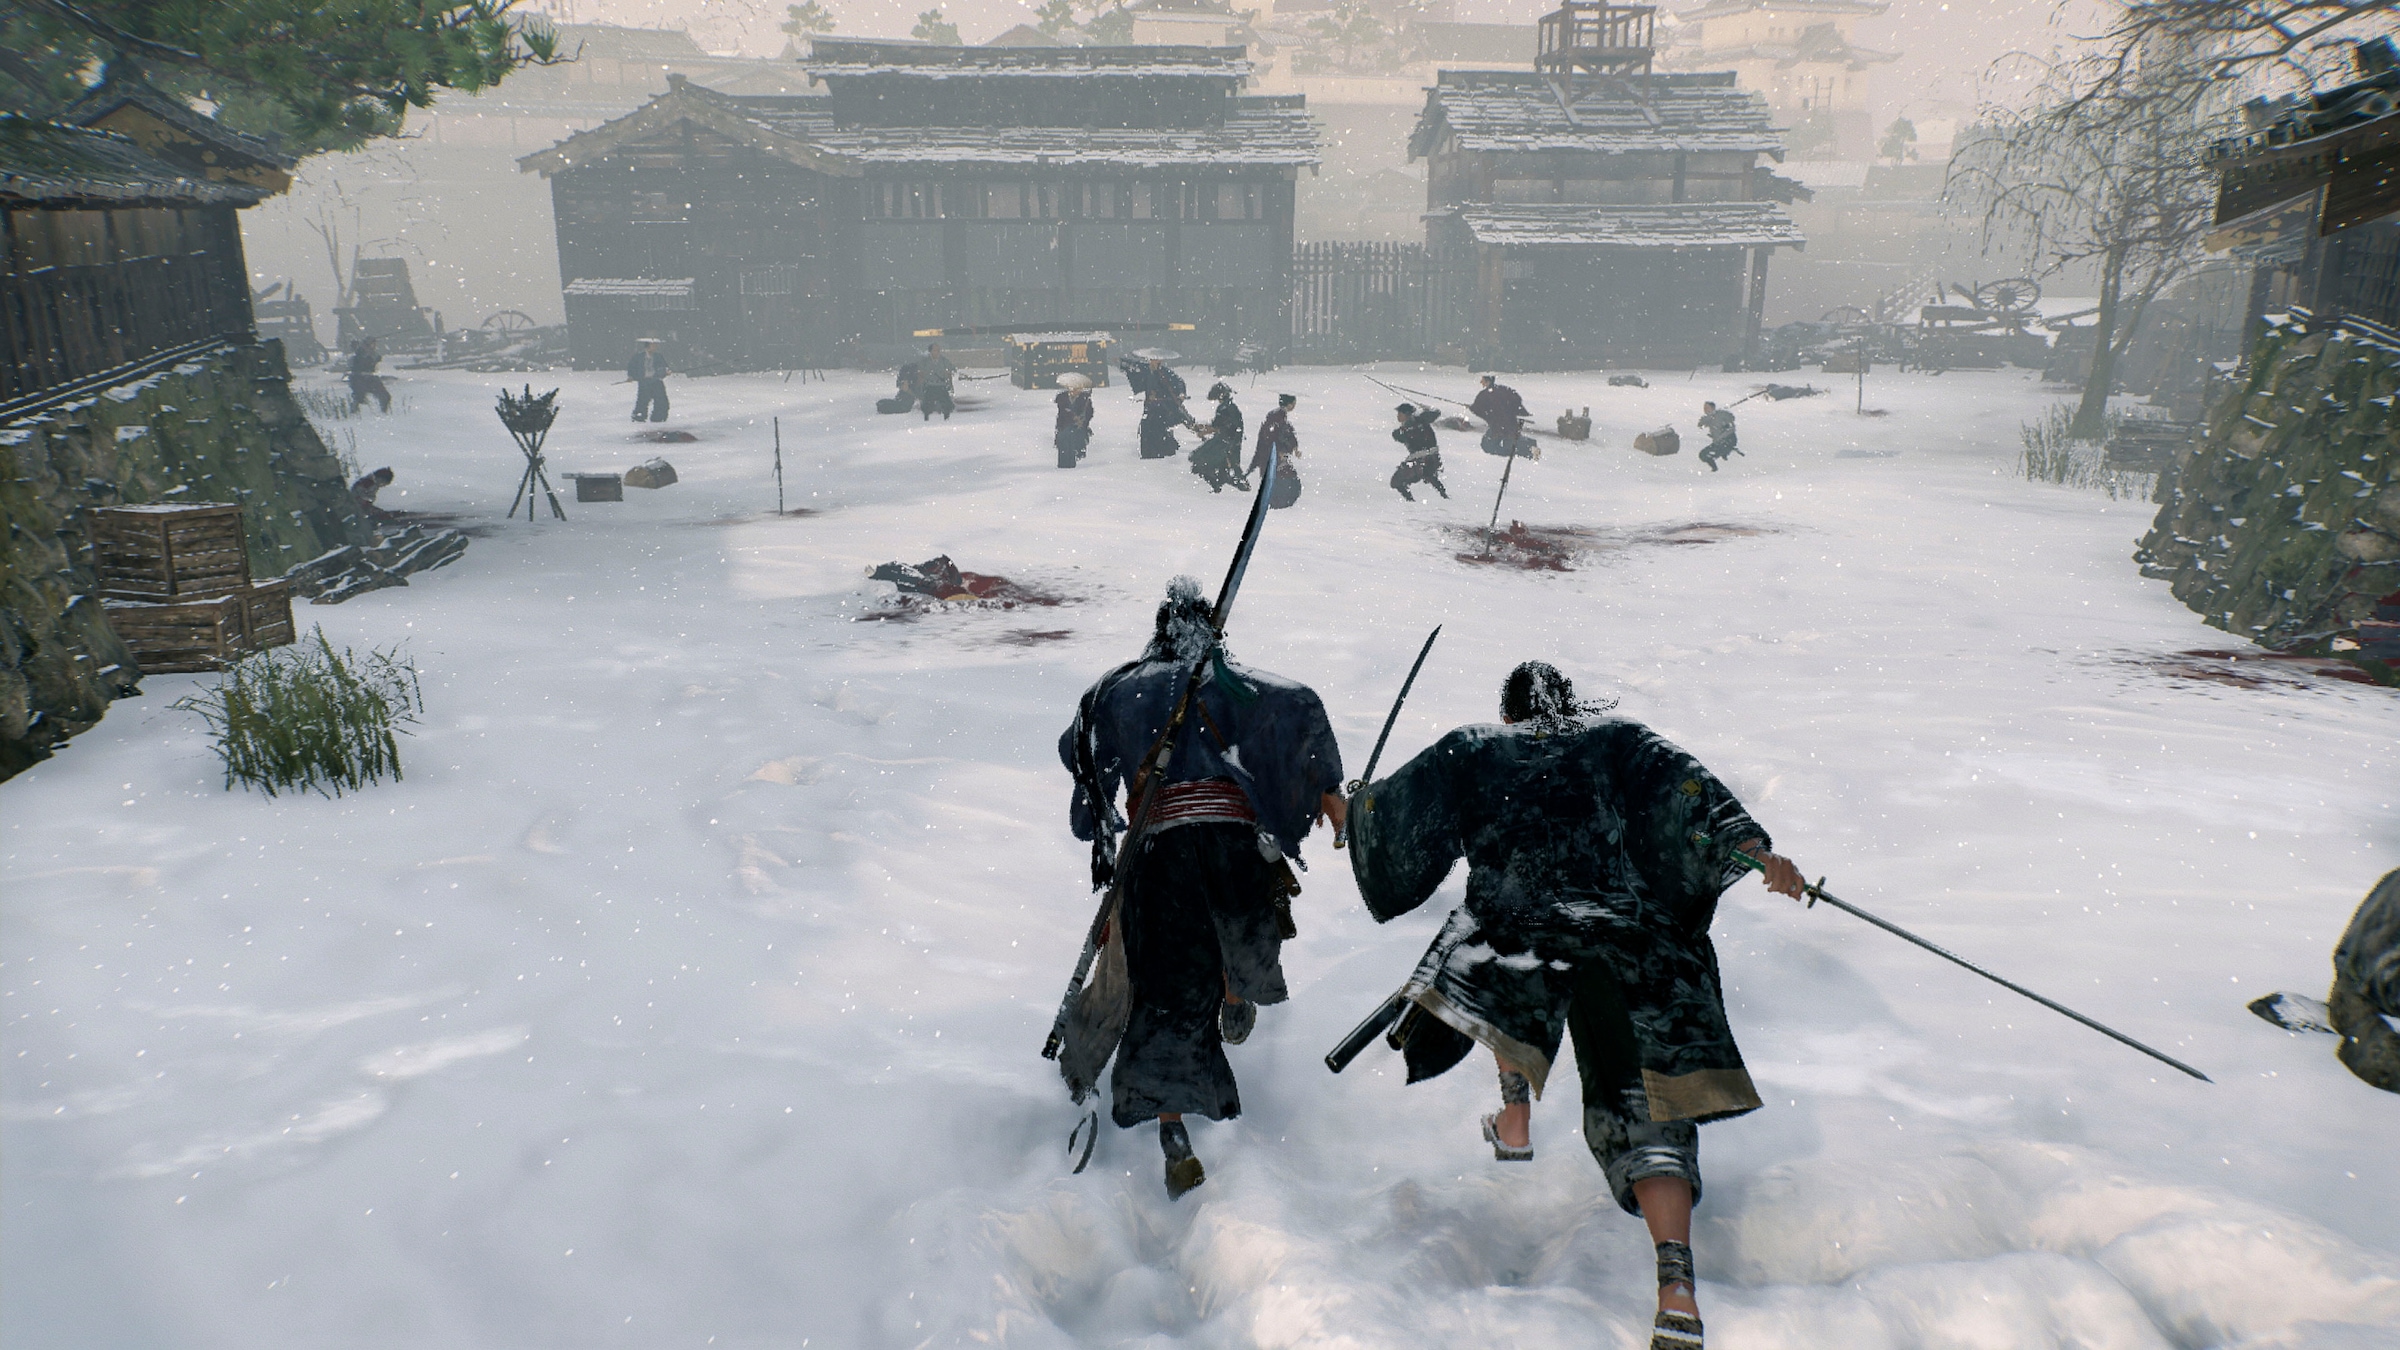 PlayStation 5 Spielesoftware »Rise of the Ronin«, PlayStation 5